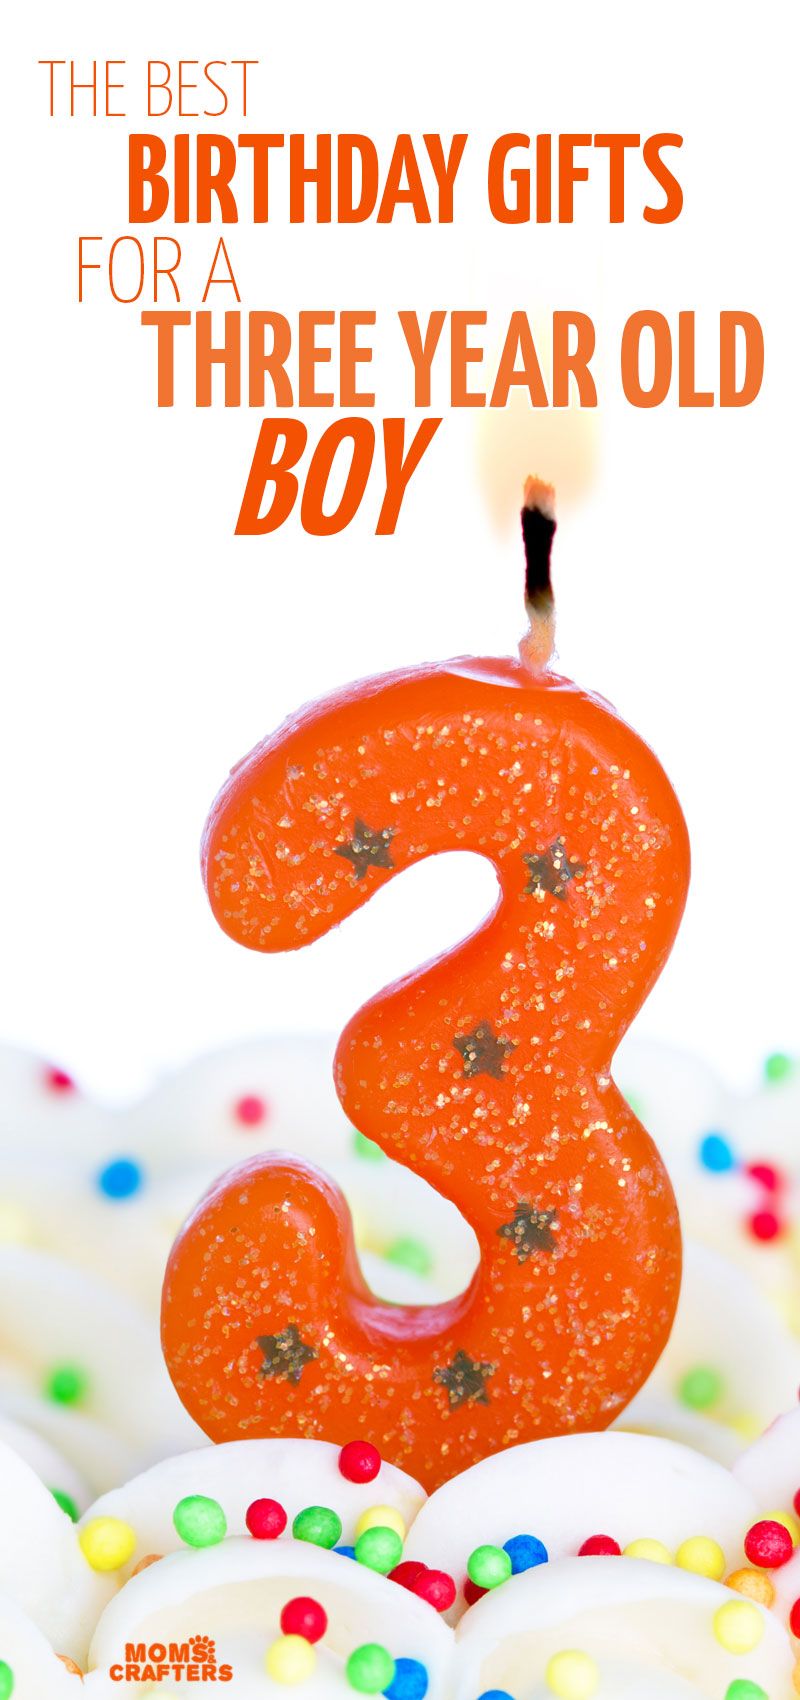 click for the best birthday gifts for 3 year old boys - recommended by a three year old boy who tested all these toys for you!